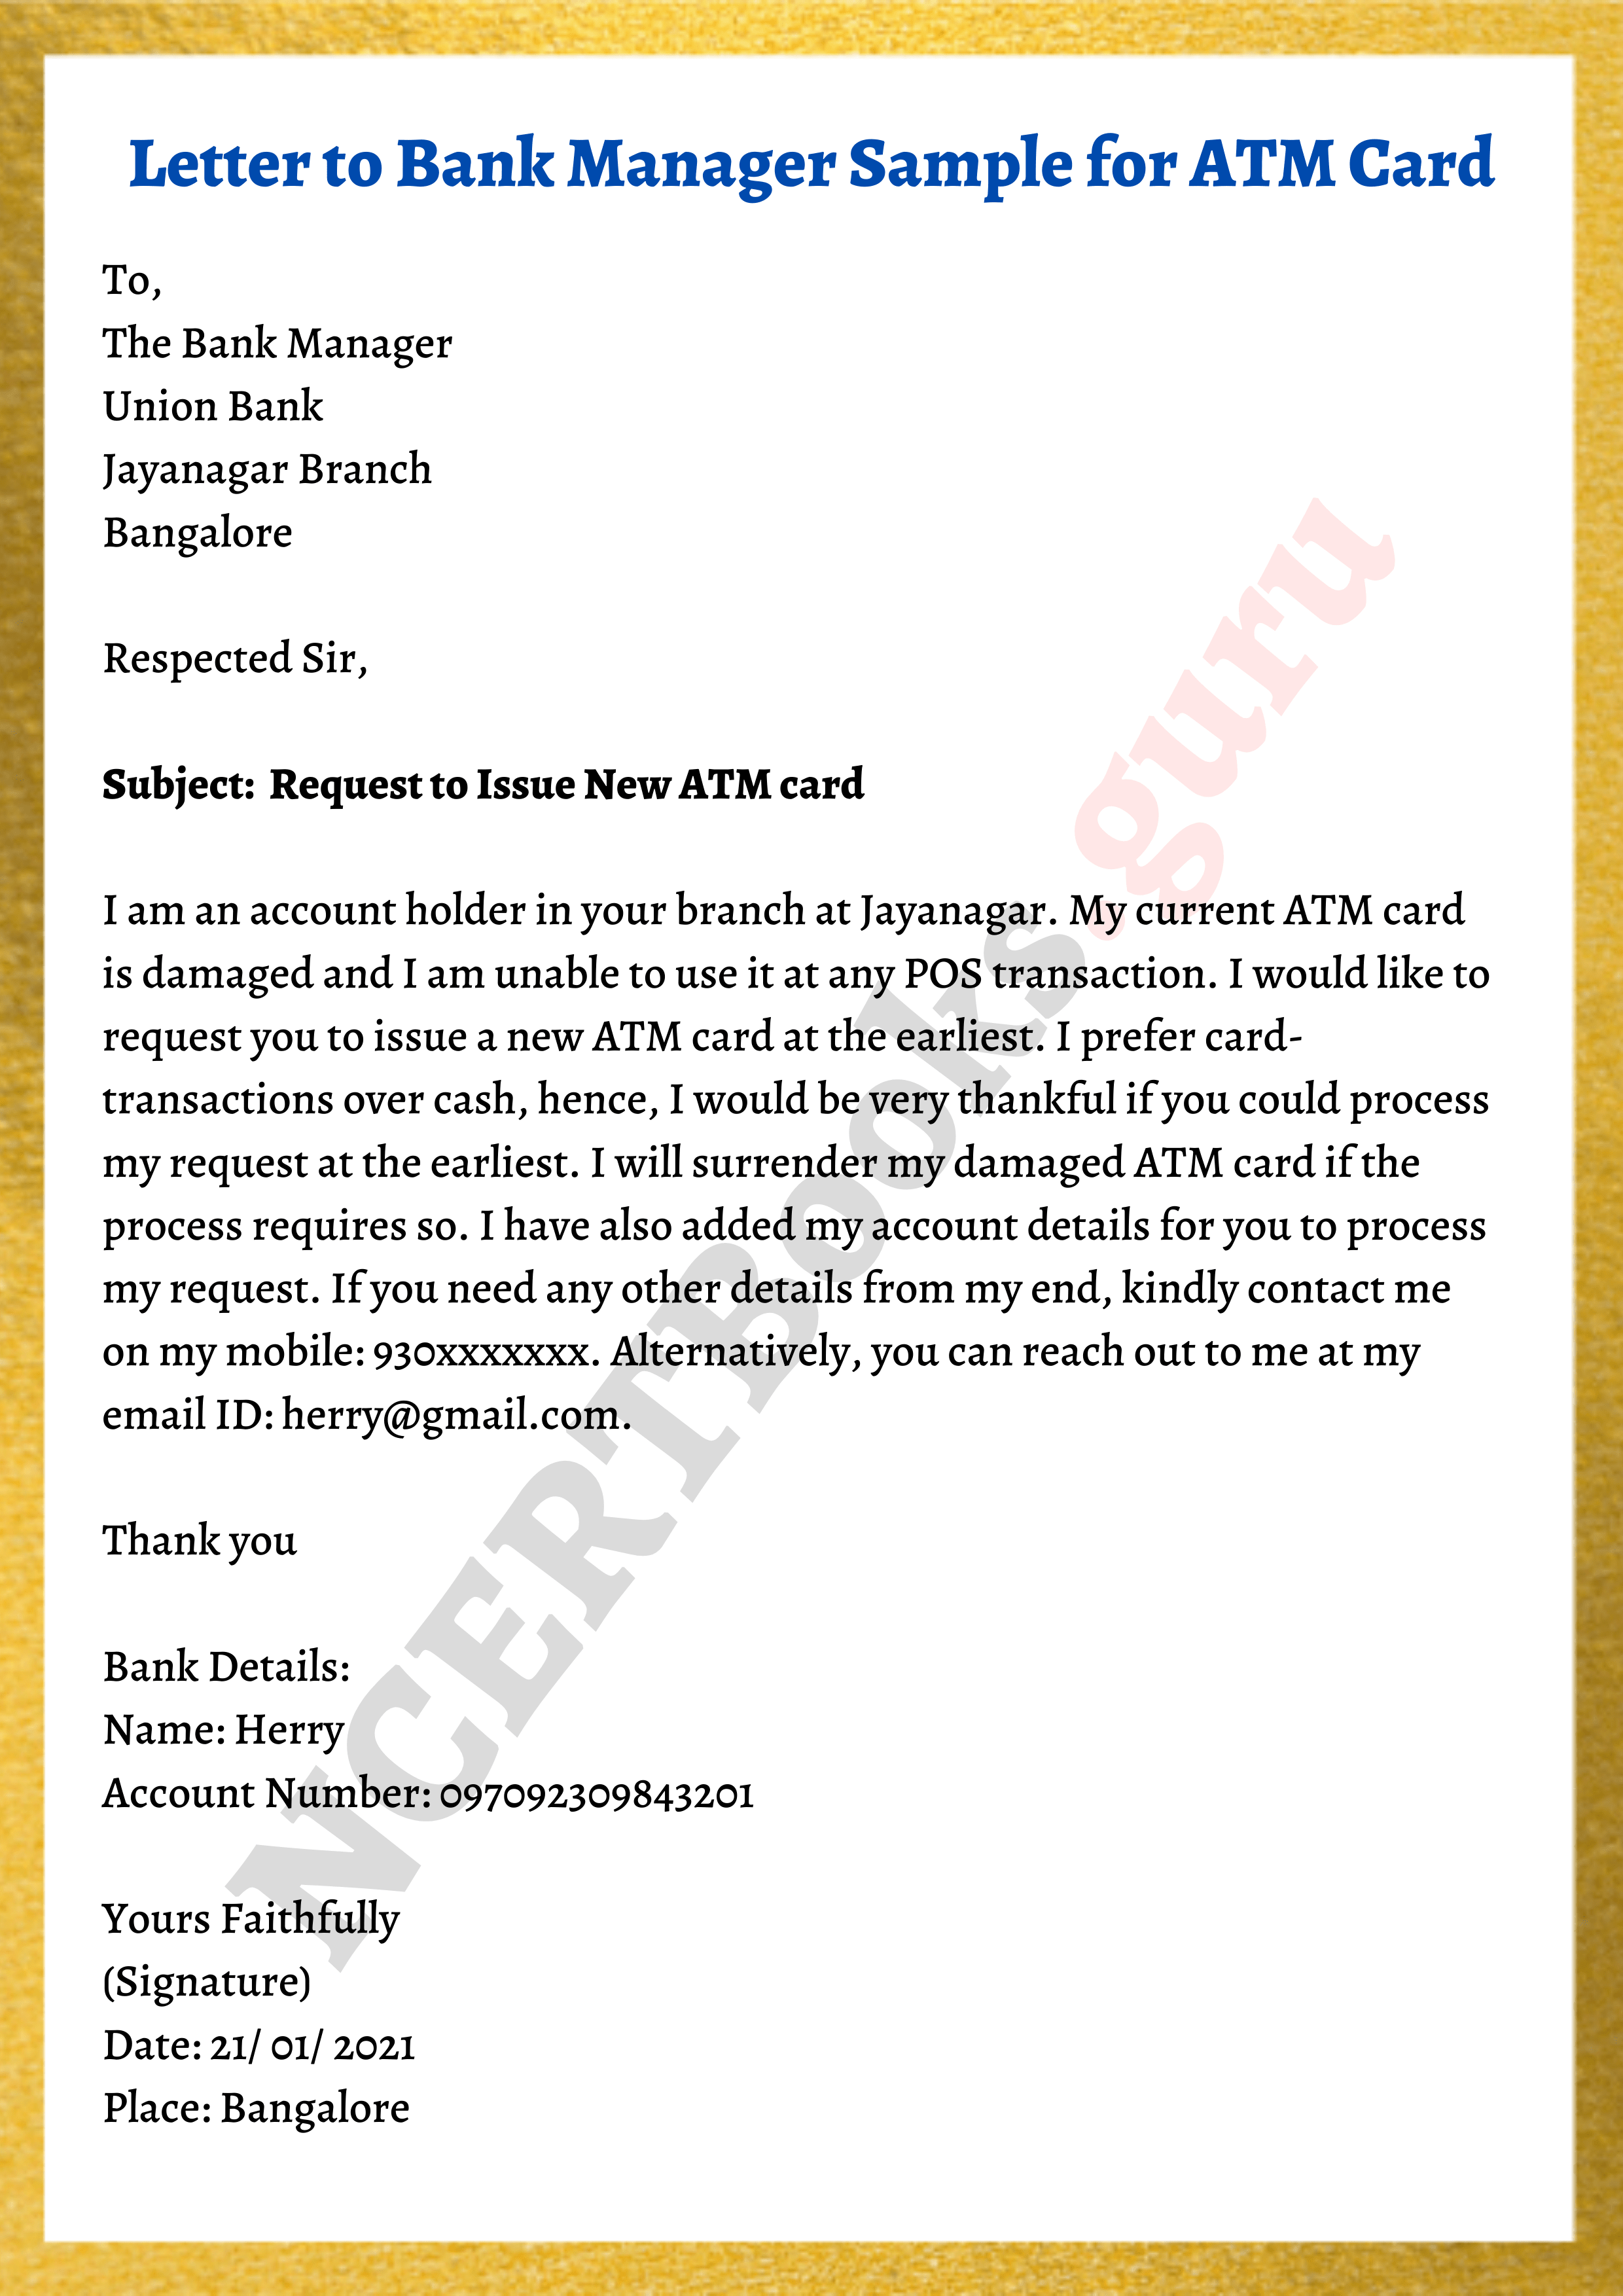 application letter for change of name to bank manager